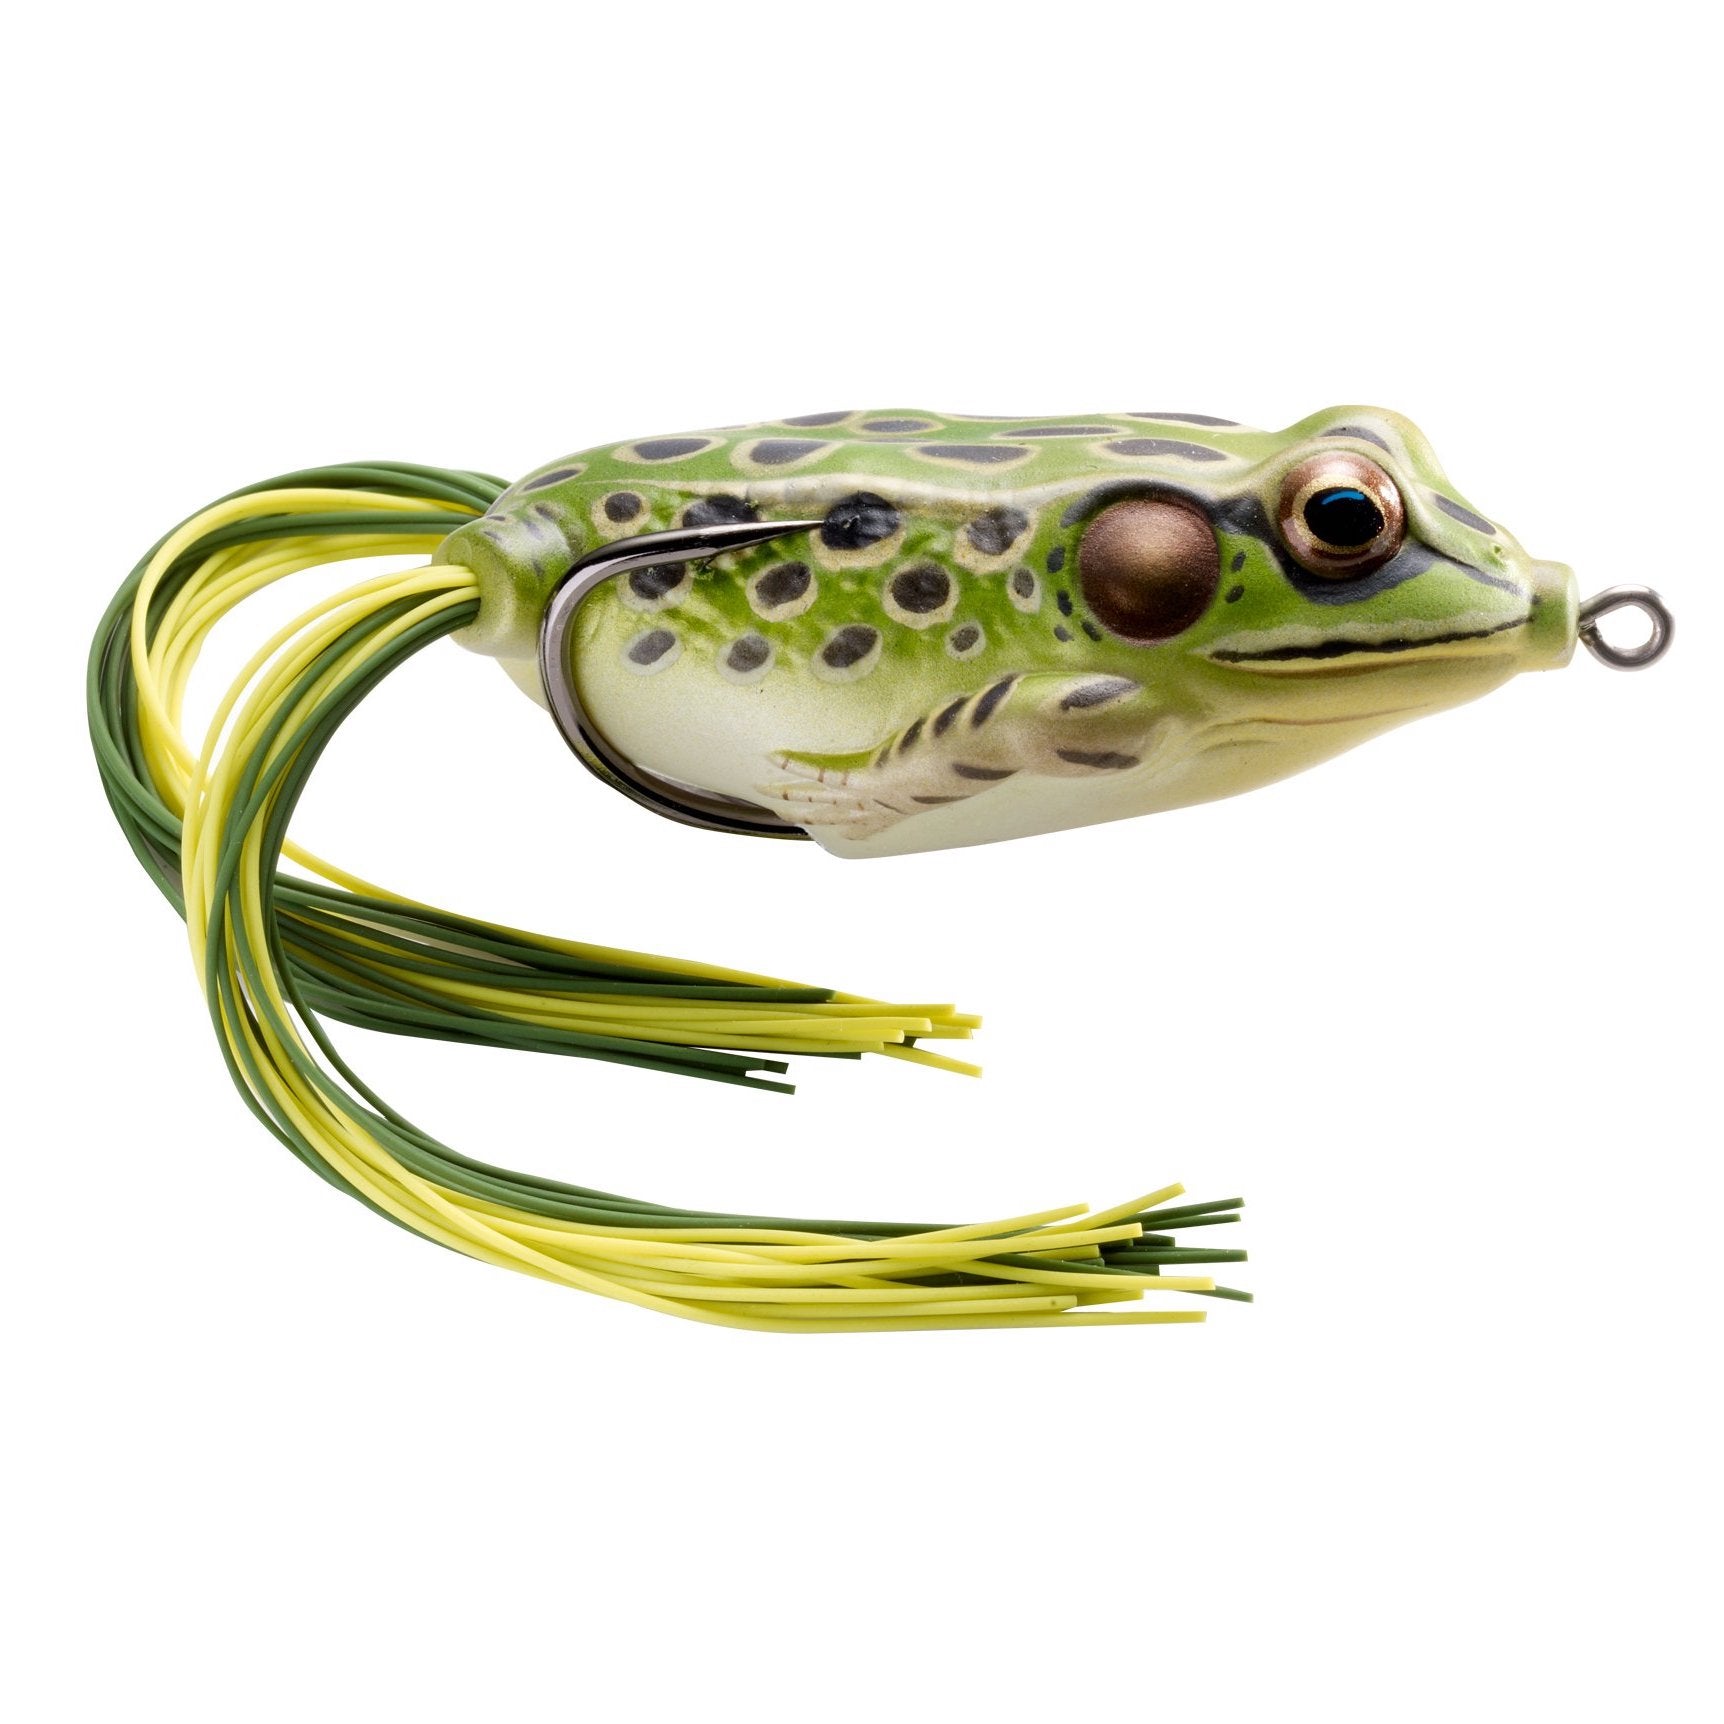 3 NEW Live Target Lures: Sunfish, Yellow/Black Frog & Bright Green Frog